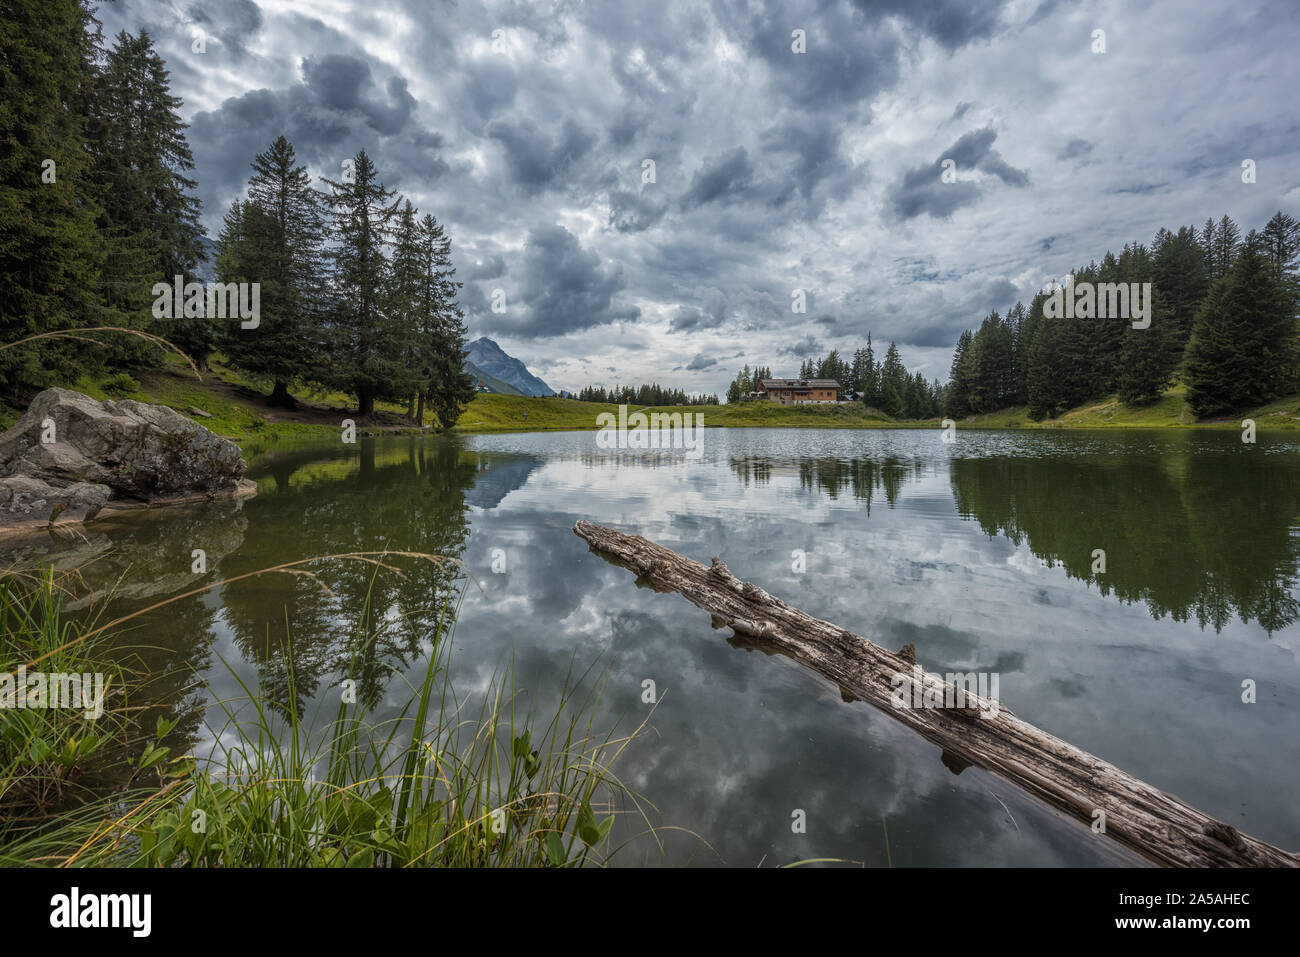 weathered trunk swimming in a mountain lake; clouds and trees reflecting in the water Stock Photo